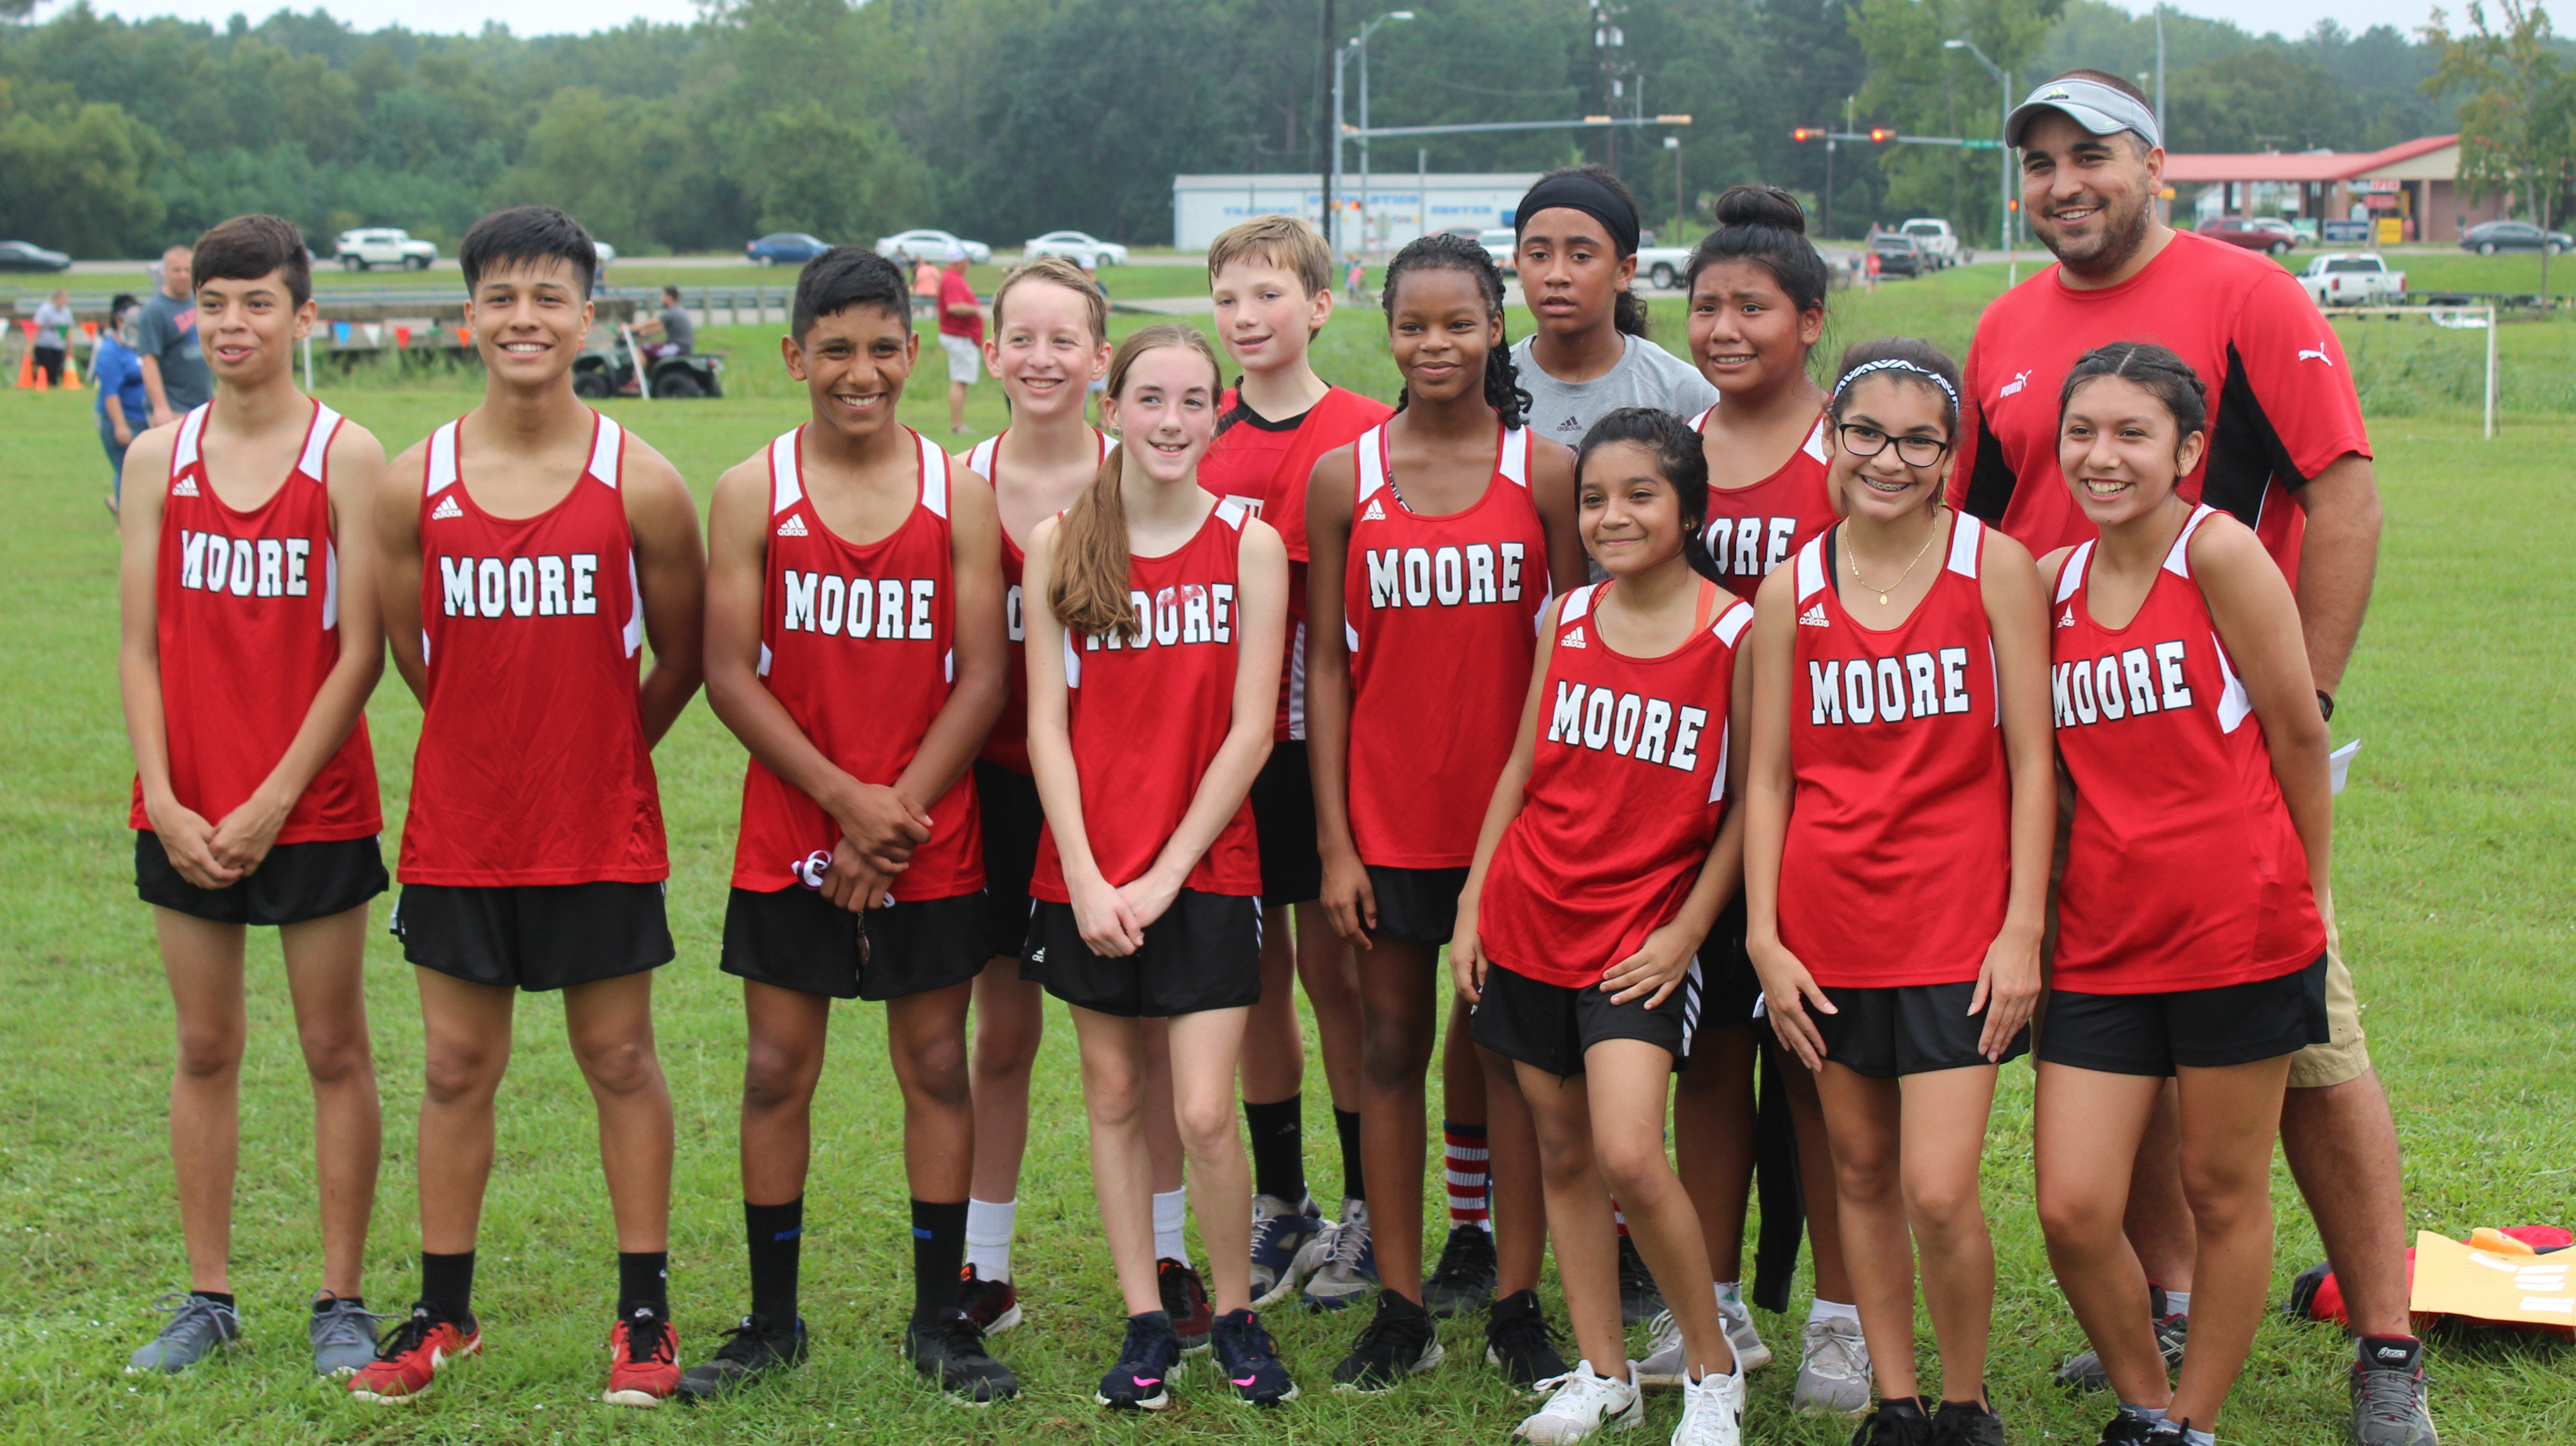 Moore cross country players posing